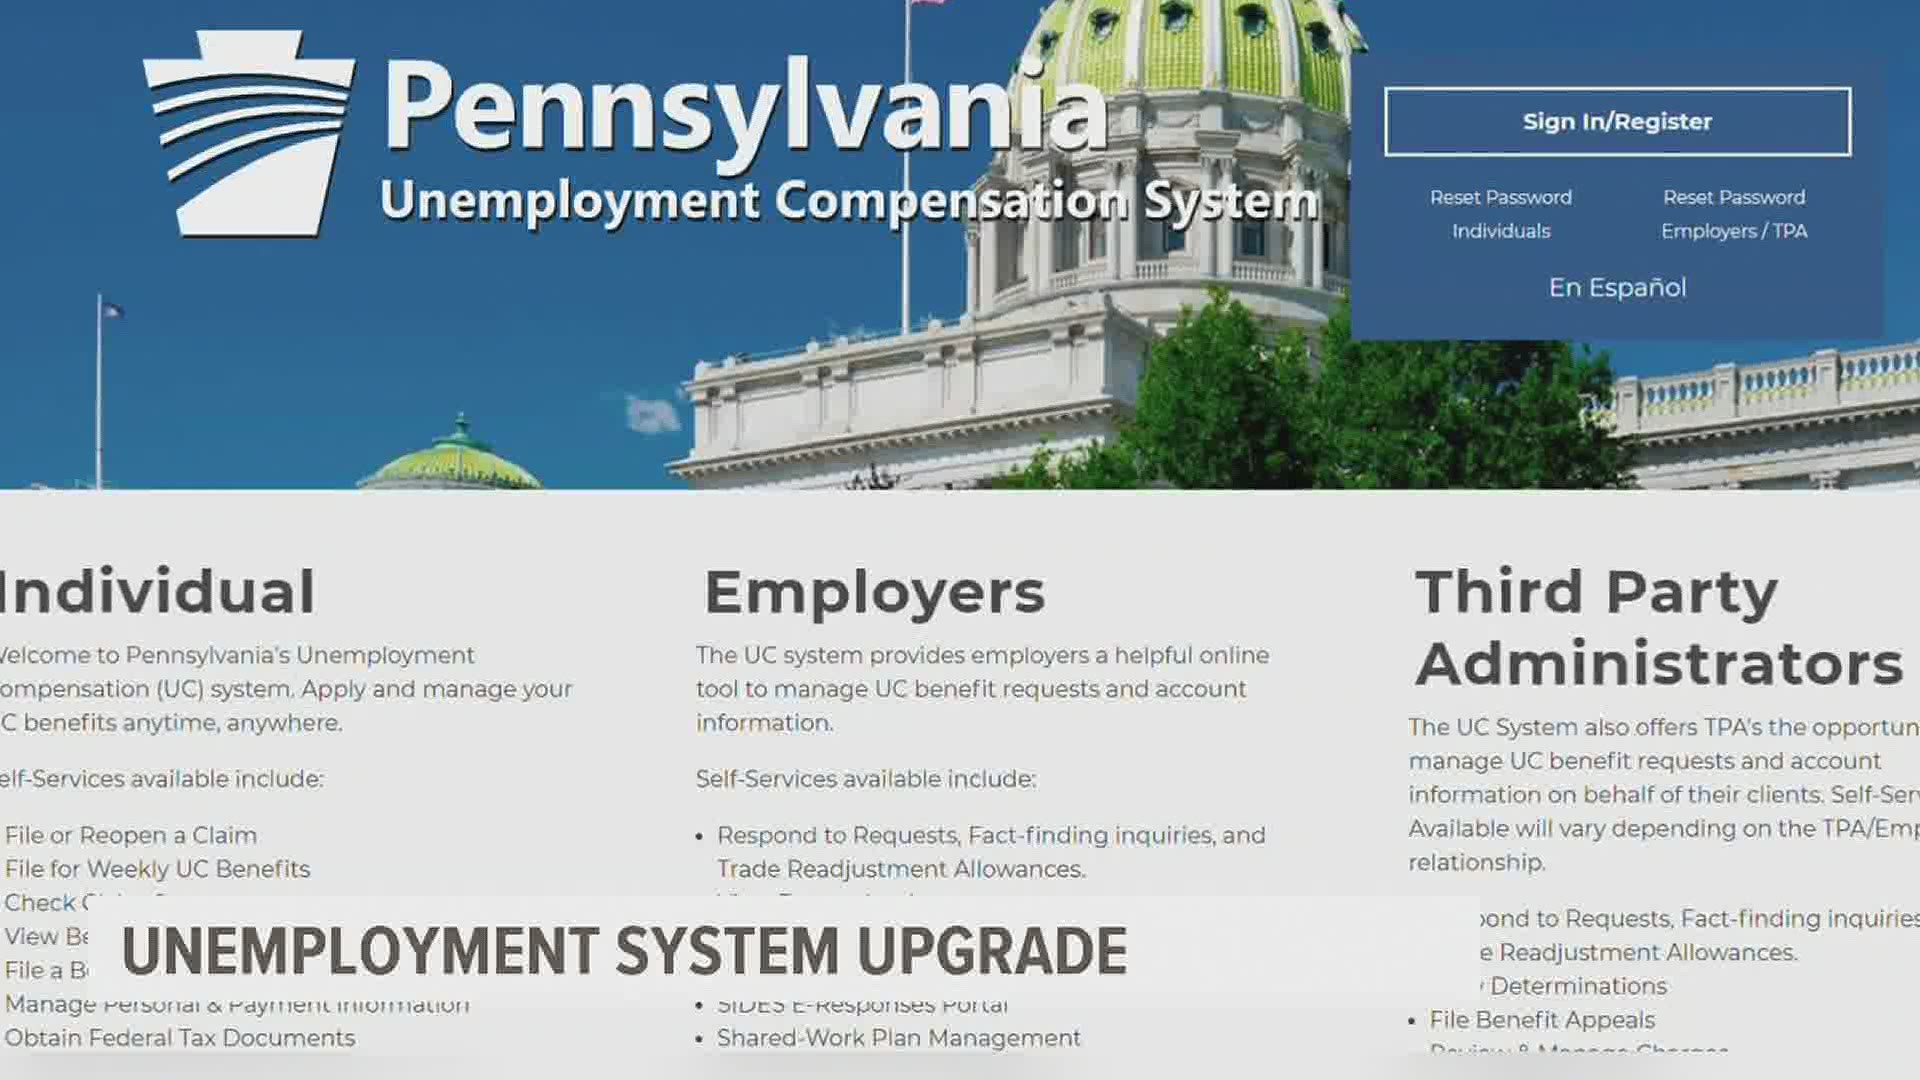 Pennsylvania's new unemployment compensation system has launched